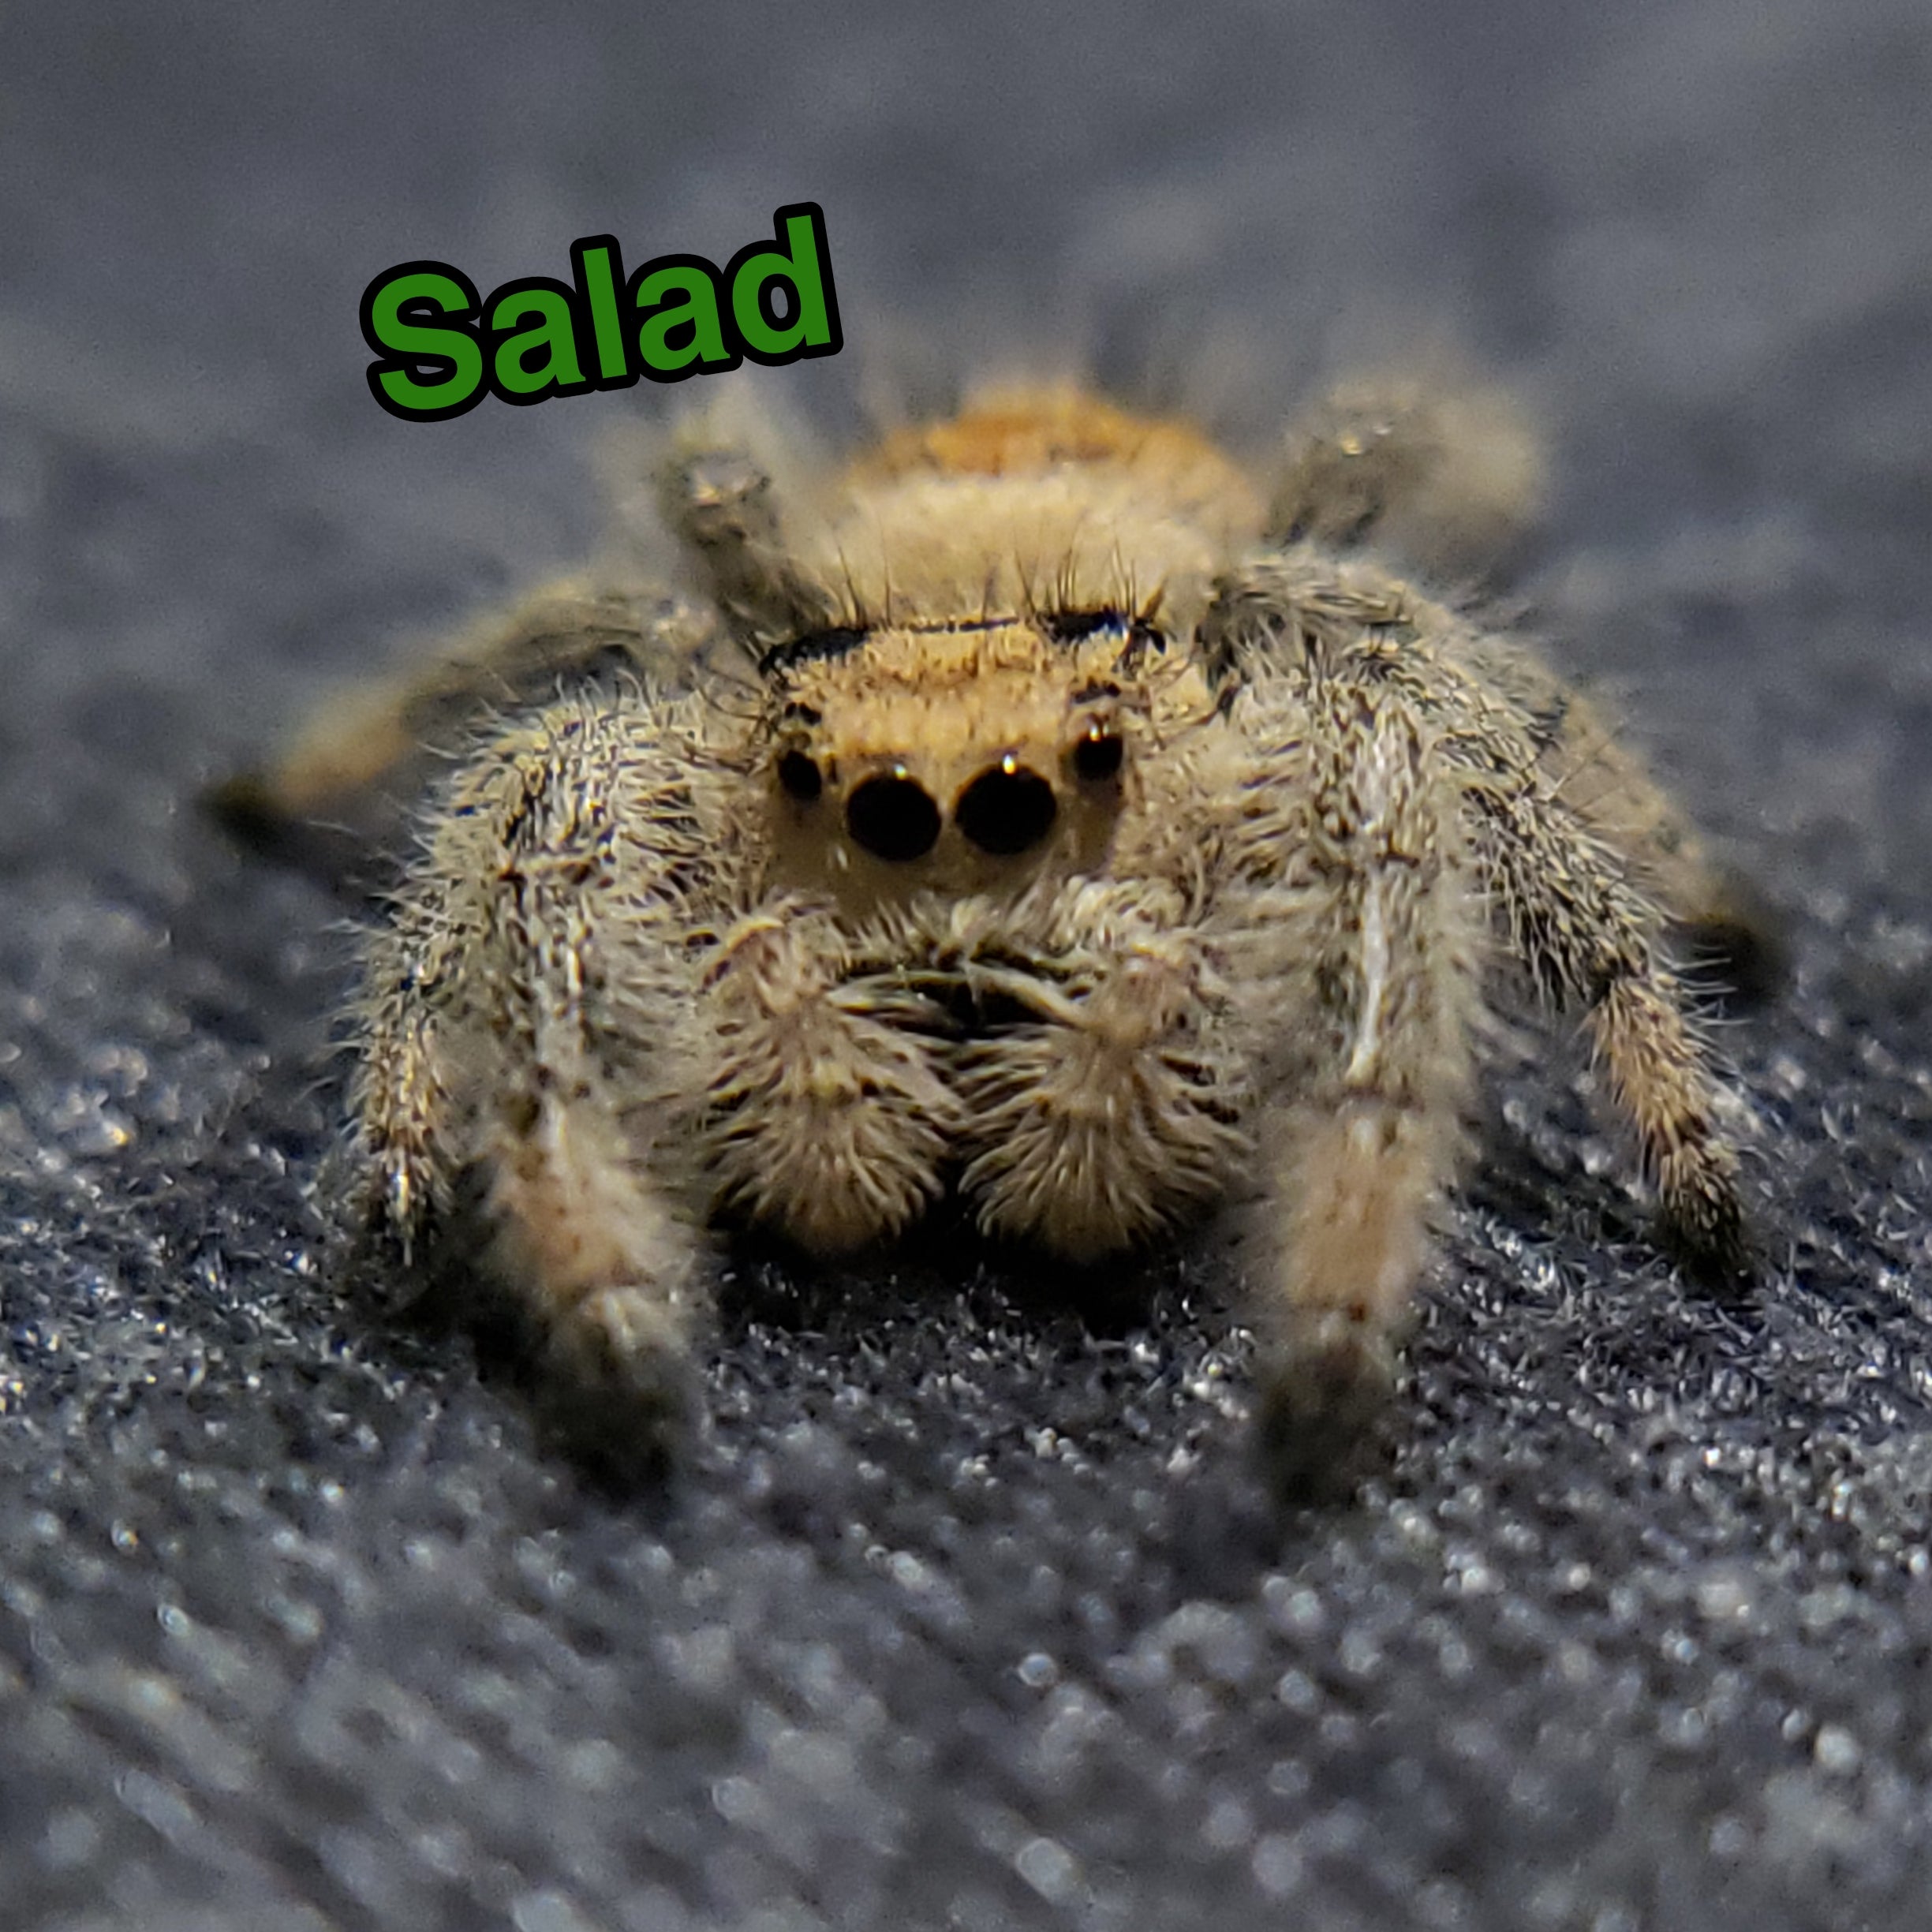 Regal Jumping Spider "Salad" - Jumping Spiders For Sale - Spiders Source - #1 Regal Jumping Spider Store